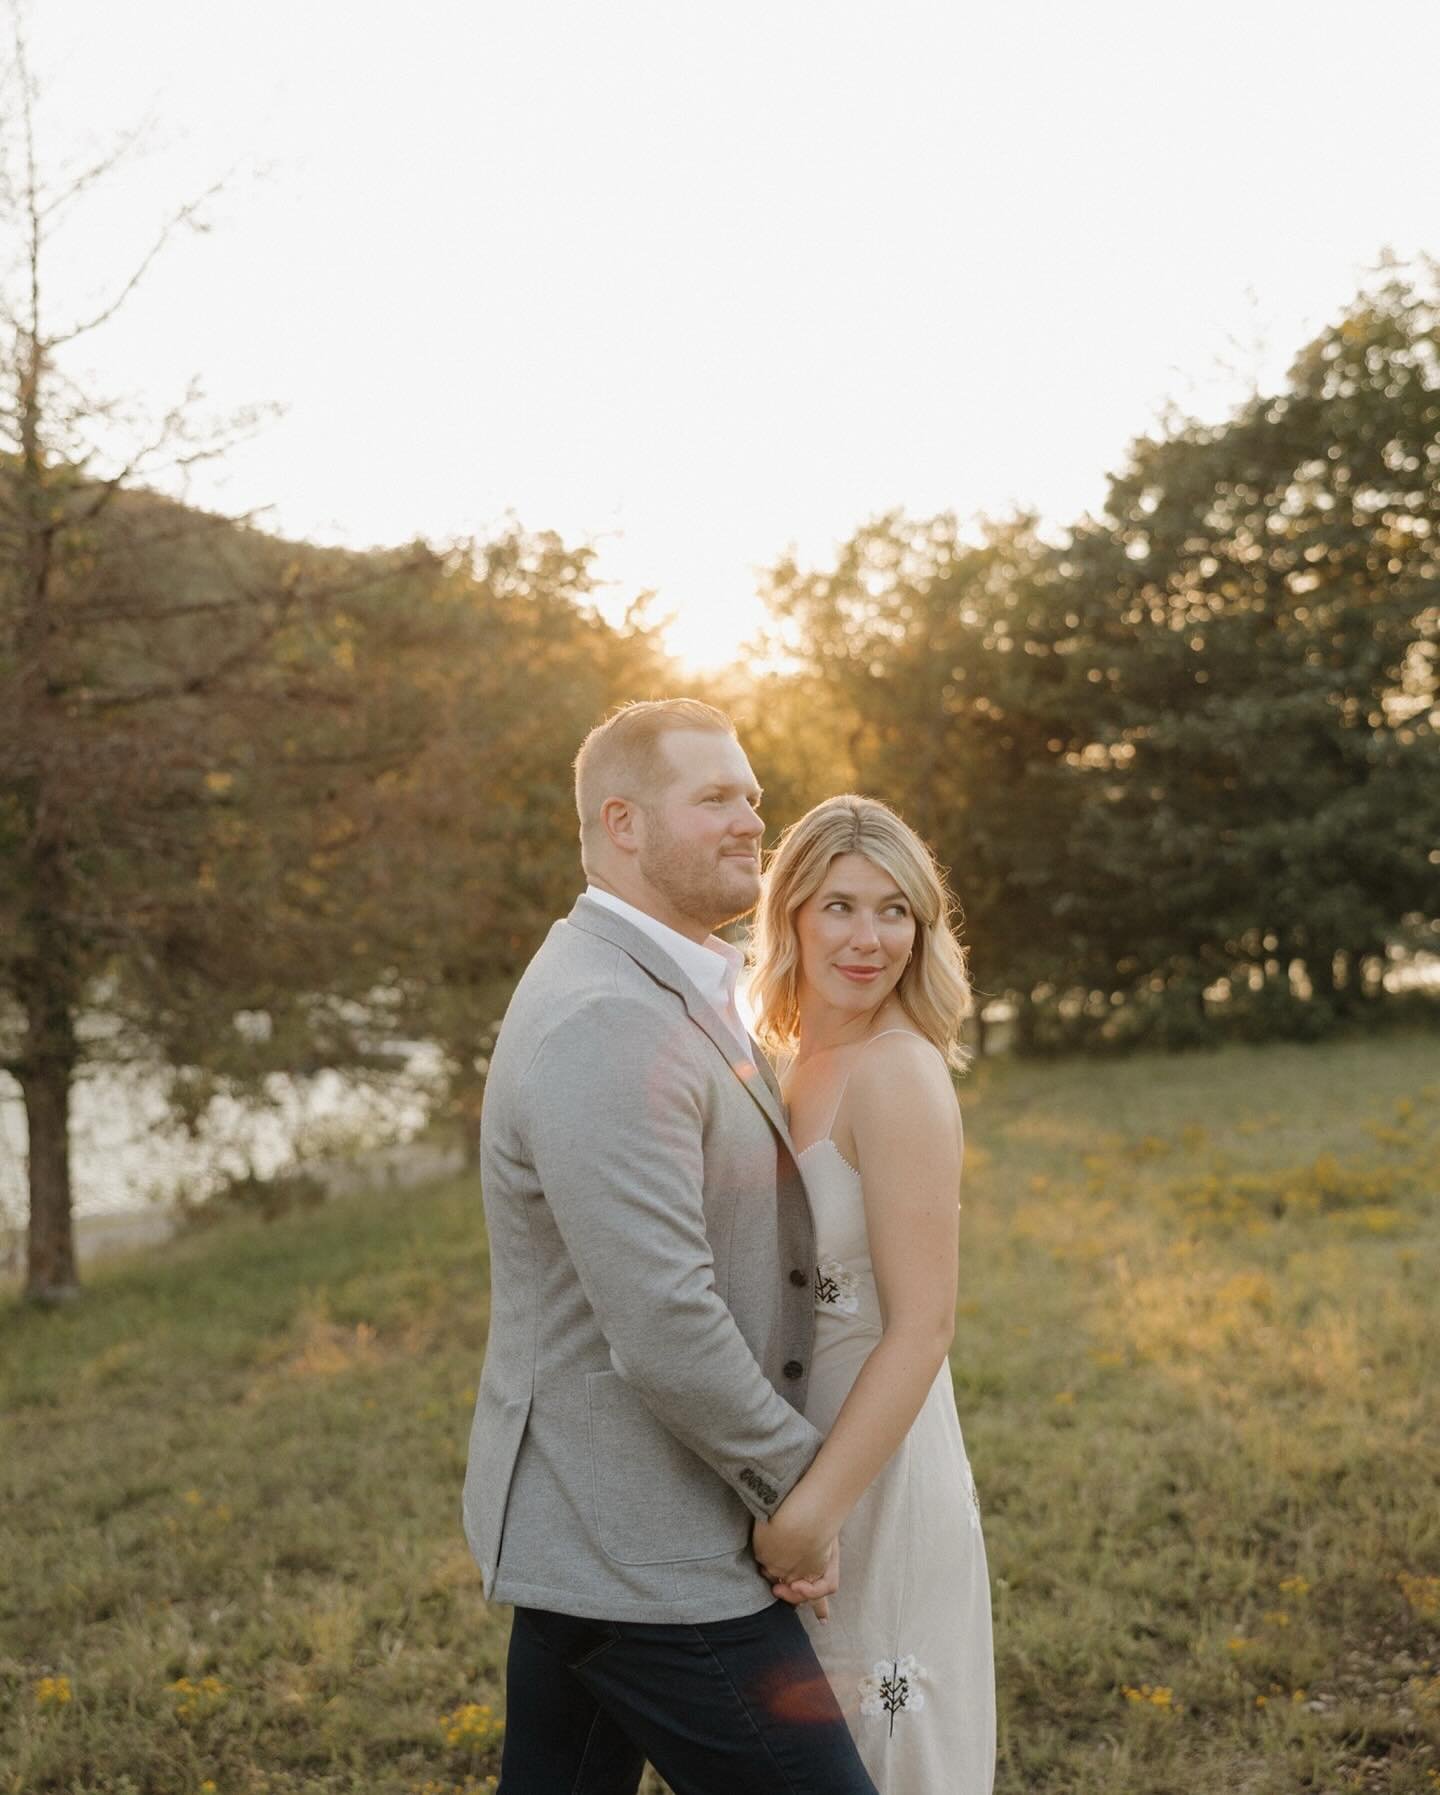 Kicking off busy season with a wedding in Austin this weekend and I&rsquo;m so excited to celebrate and capture all of my couples this year, including these two&hellip; Sydney &amp; Joe | Big Cedar